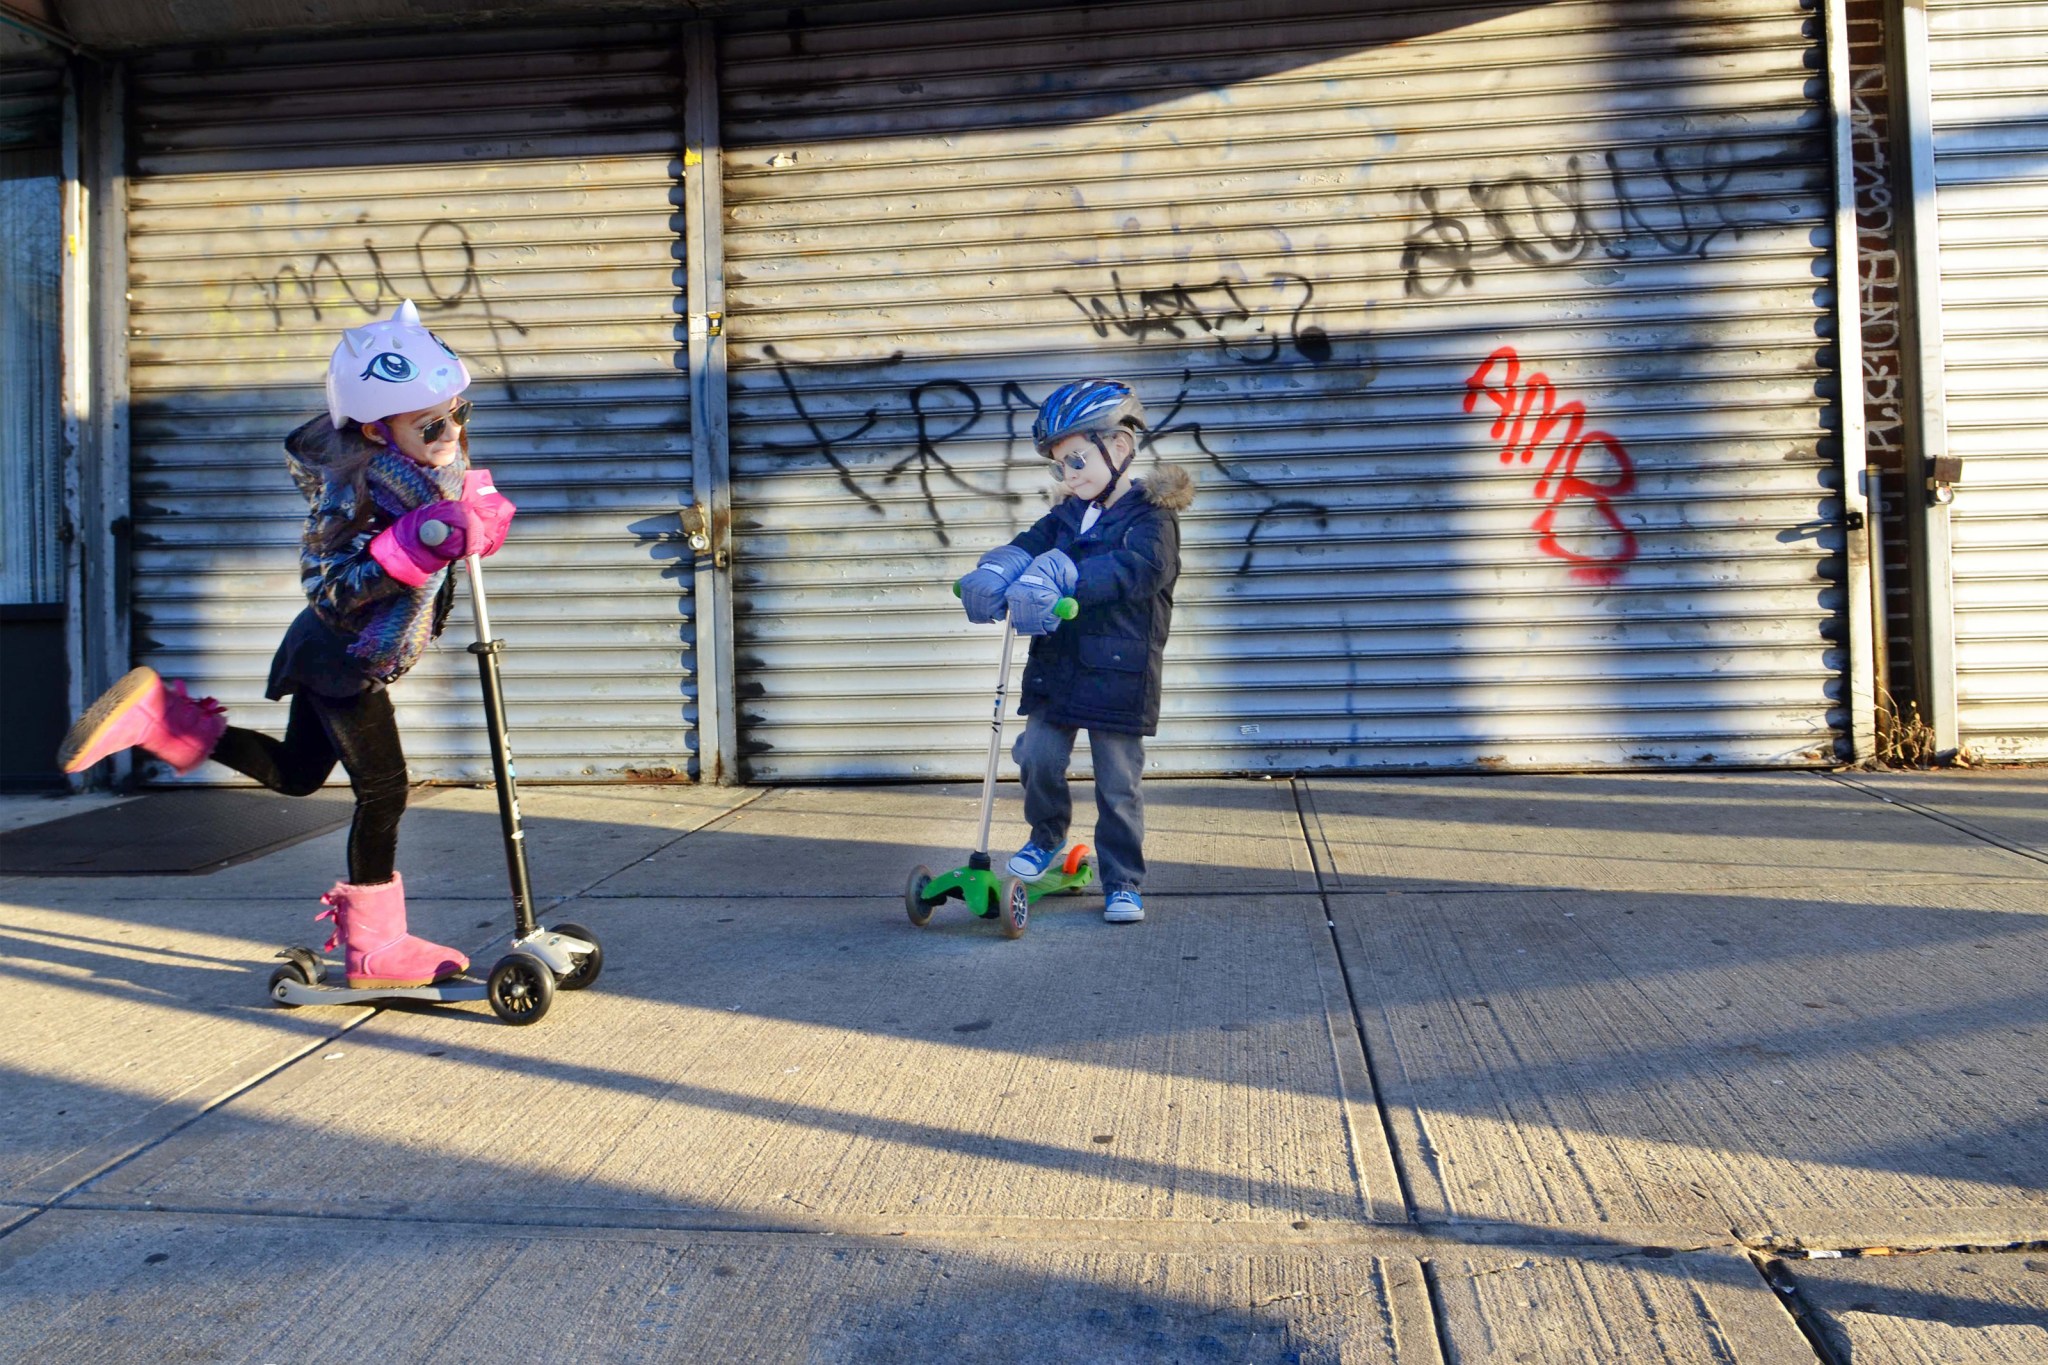 Kids riding their scooters on an urban sidewalk